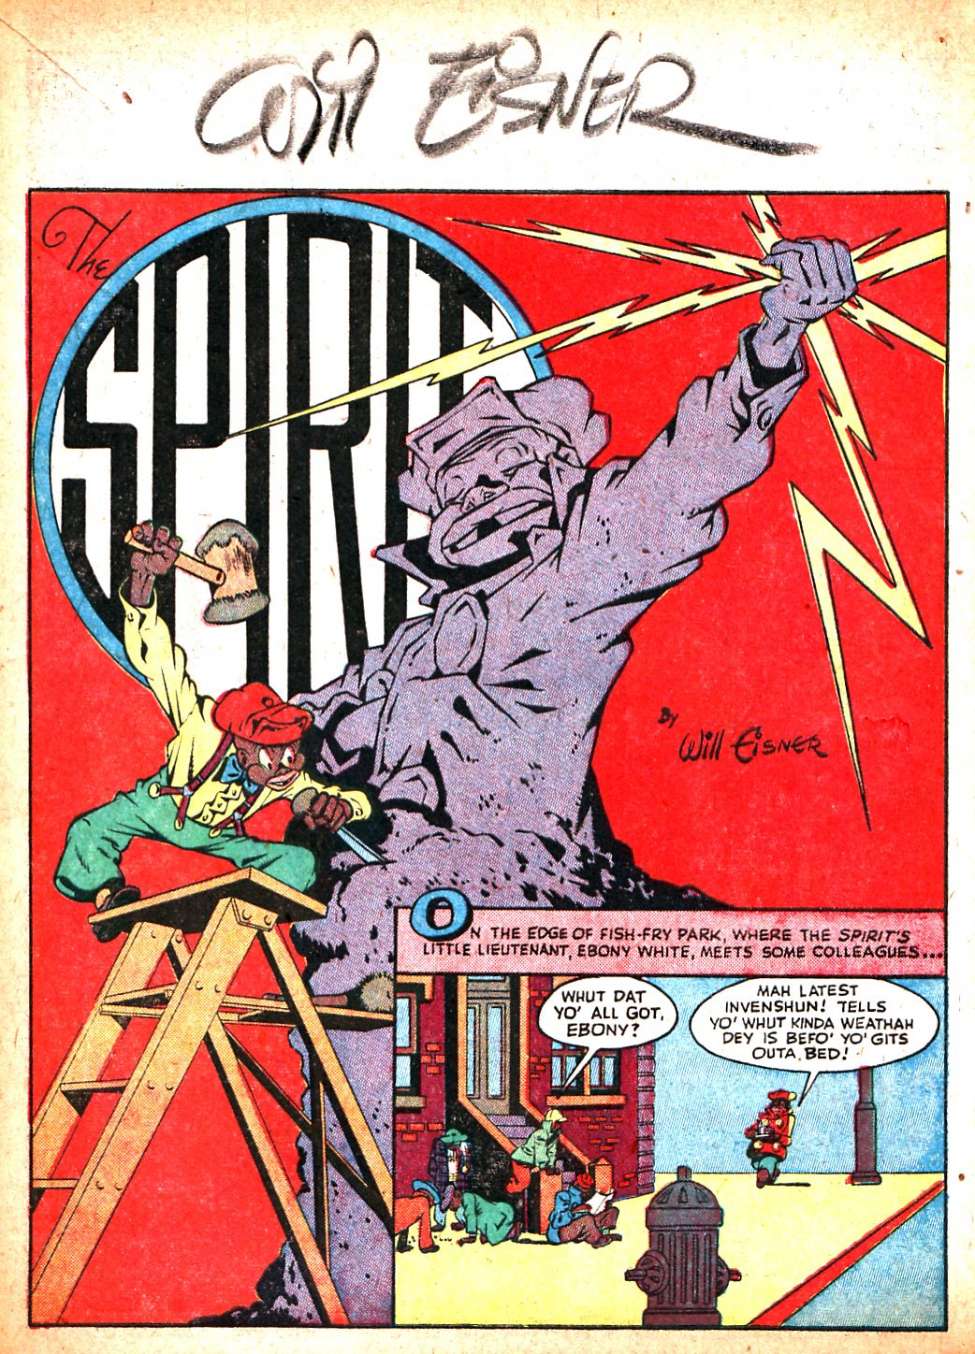 Comic Book Cover For The Spirit (1944-04-23) - Chicago Sun